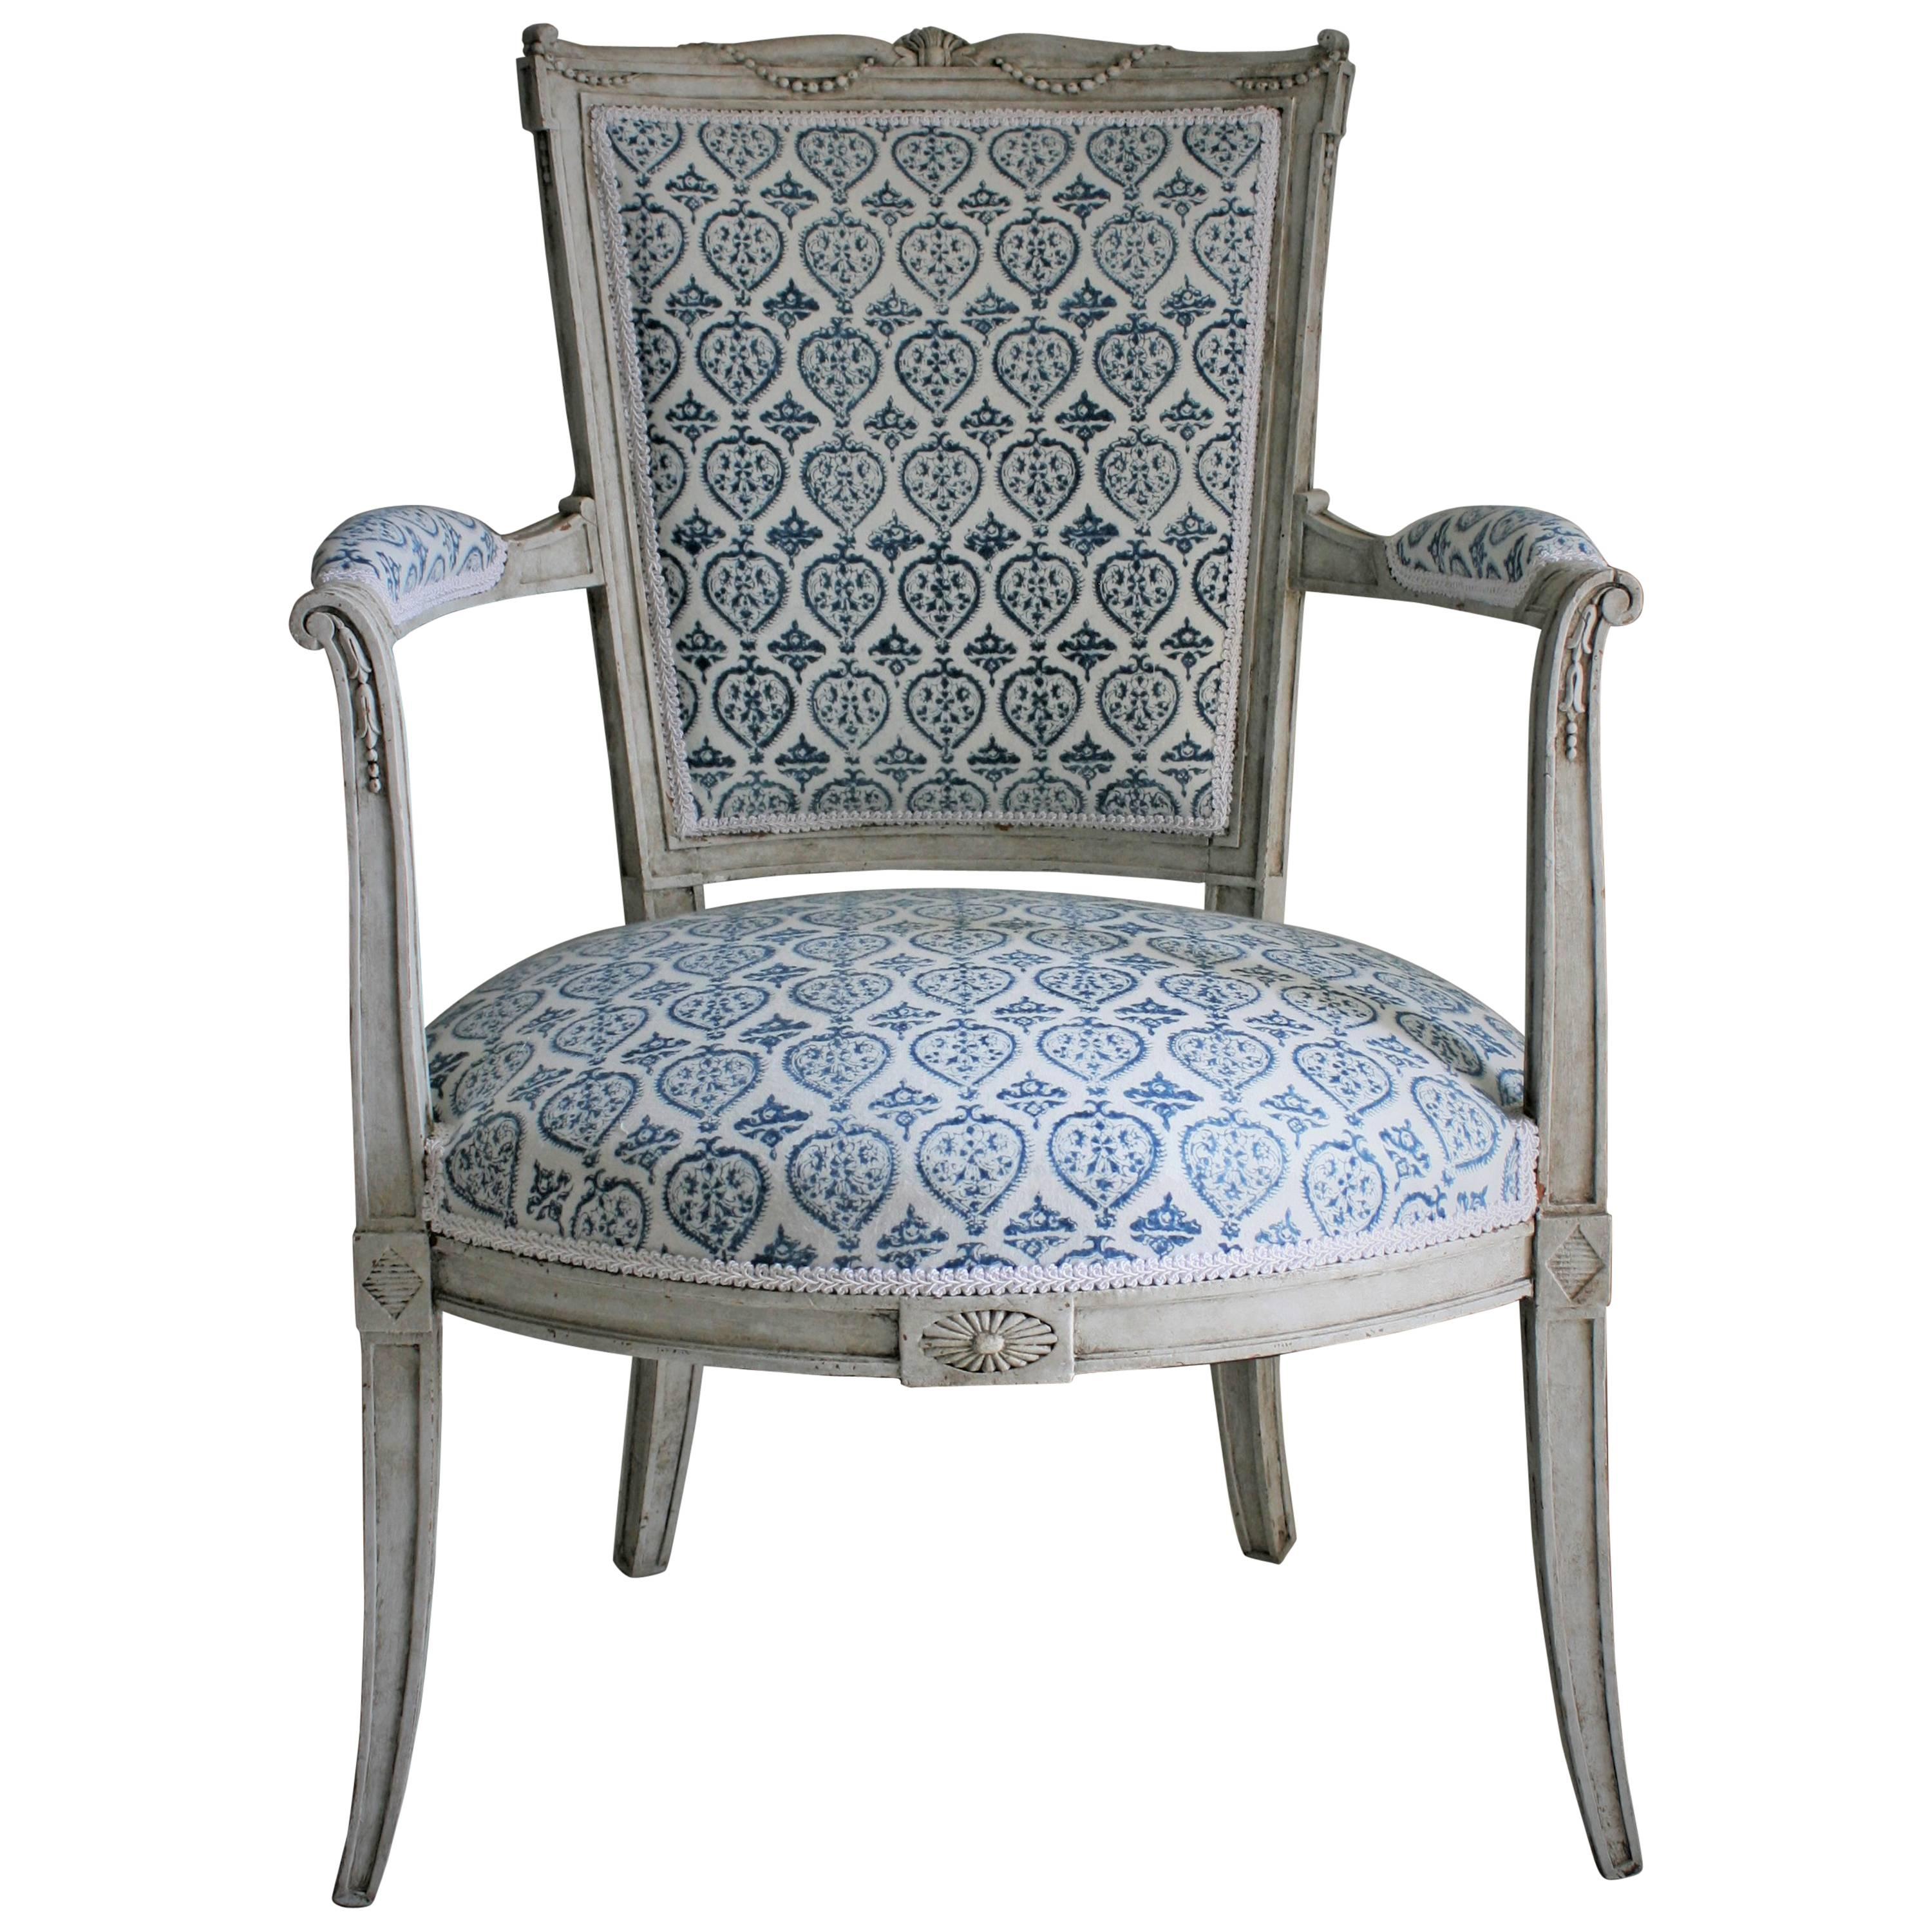 Late 19th Century French Empire Style Painted Armchair in French-Indie Fabric